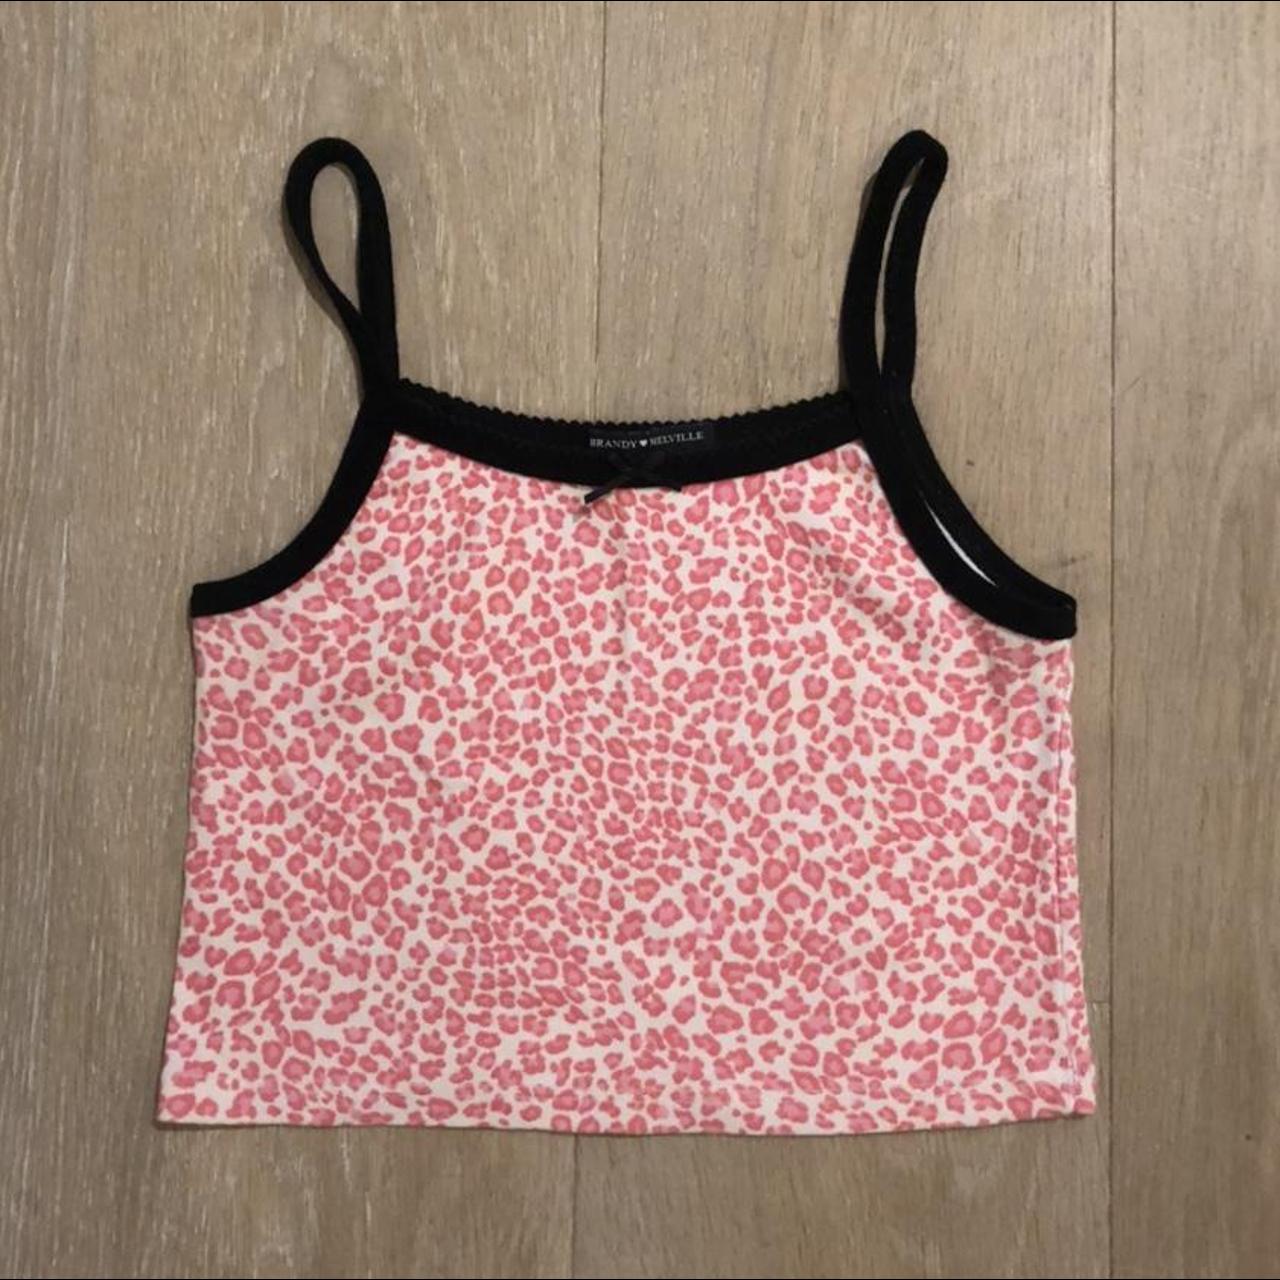 Product Image 1 - Brandy Melville pink leopard tank